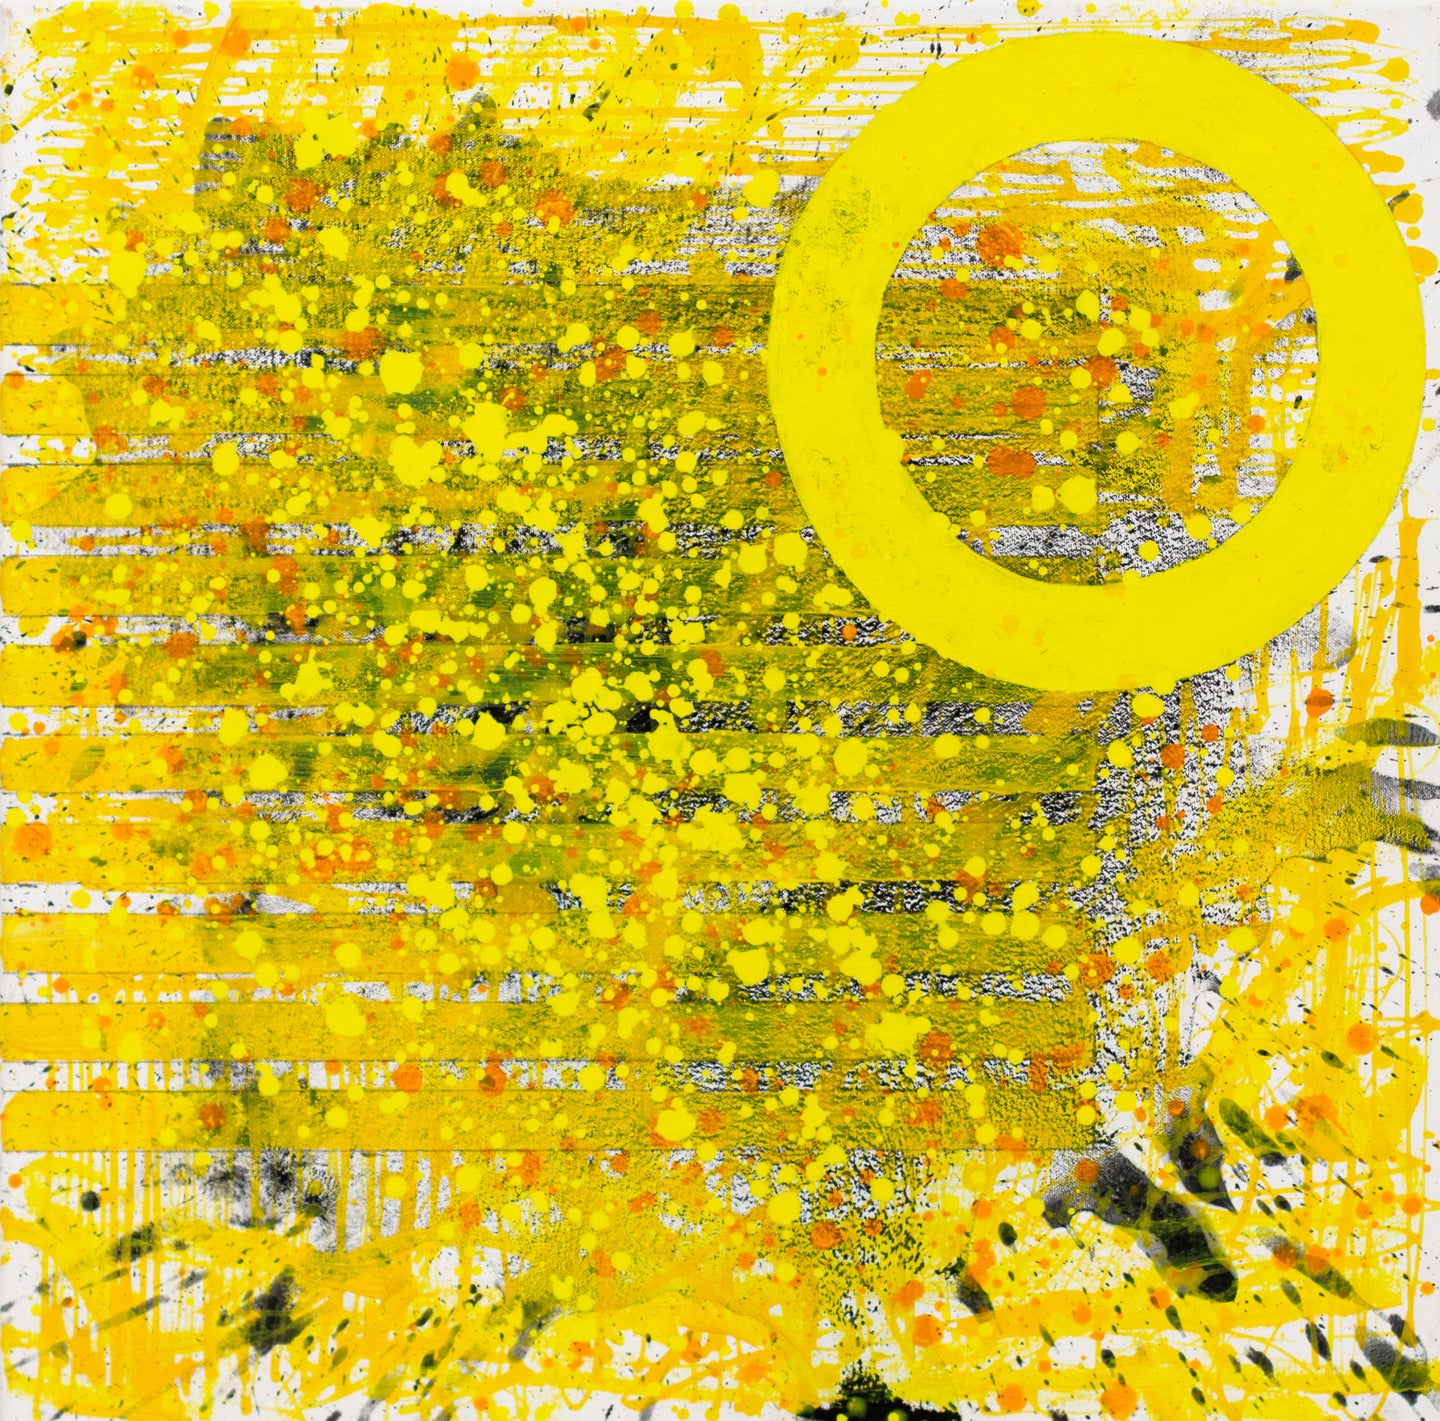 JSM, Sunshine (The Light after the Darkness)24.24.02, 2020, acrylic on canvas, 24 x 24 inches, Sunshine art, Yellow and black Abstract Art for Sale at Manolis Projects Art Gallery, Miami Fl